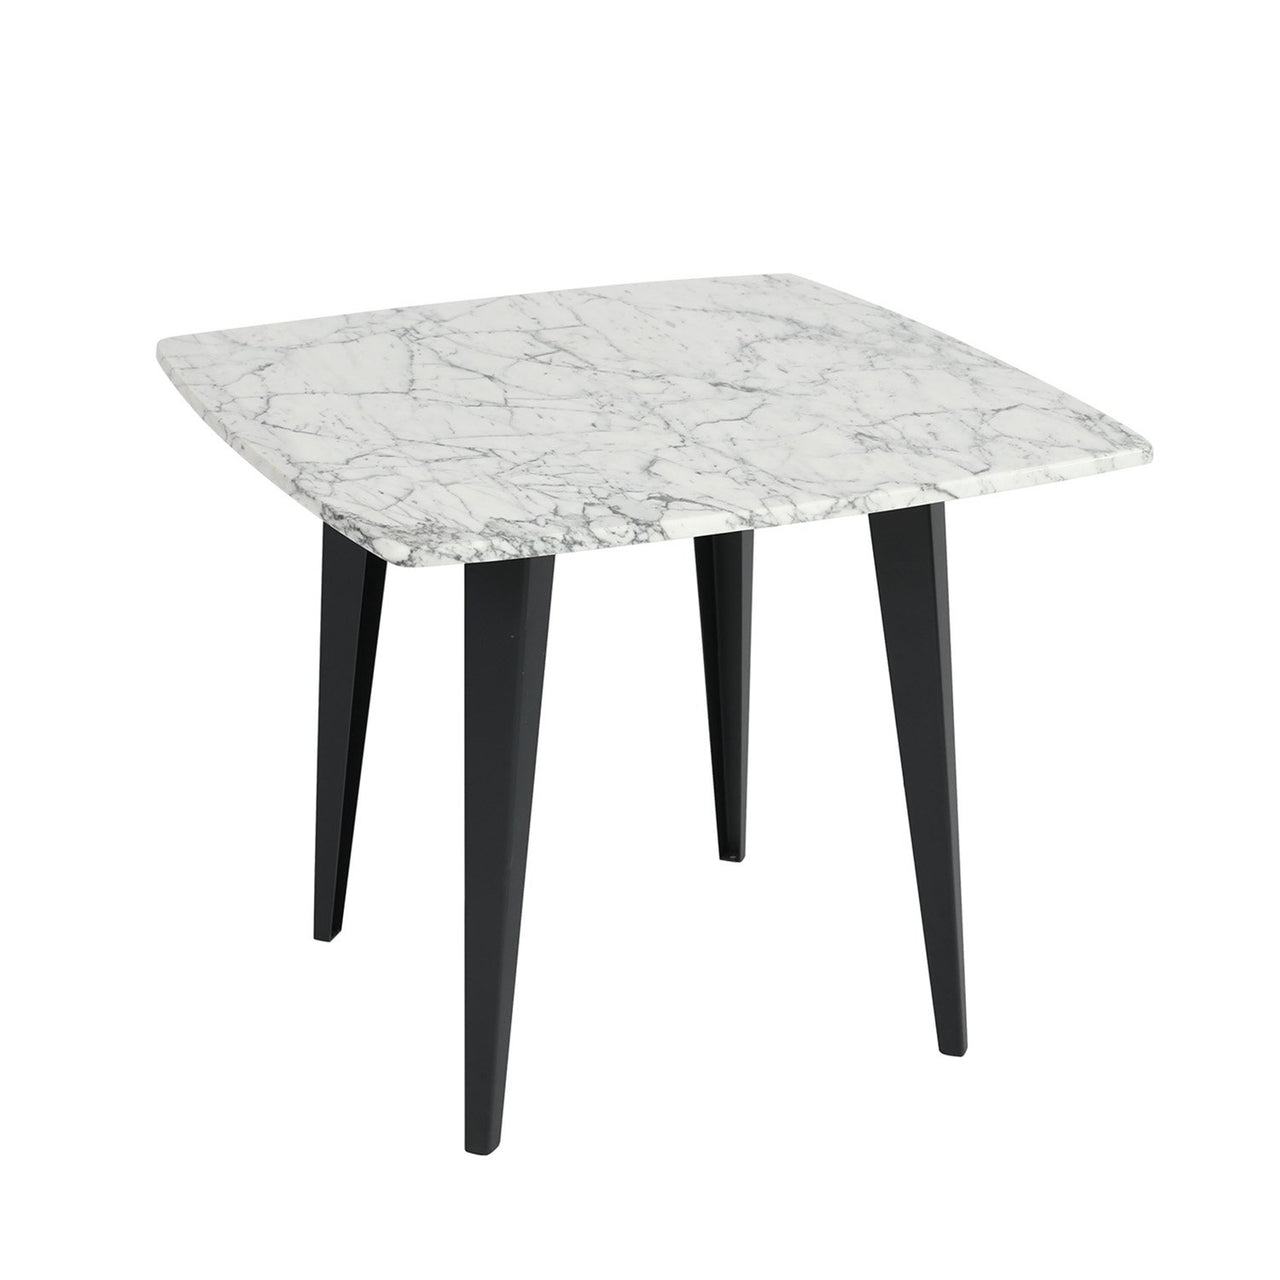 Soro 24" Square Italian Carrara White Marble Side Table with Metal Legs Side Table The Bianco Collection 